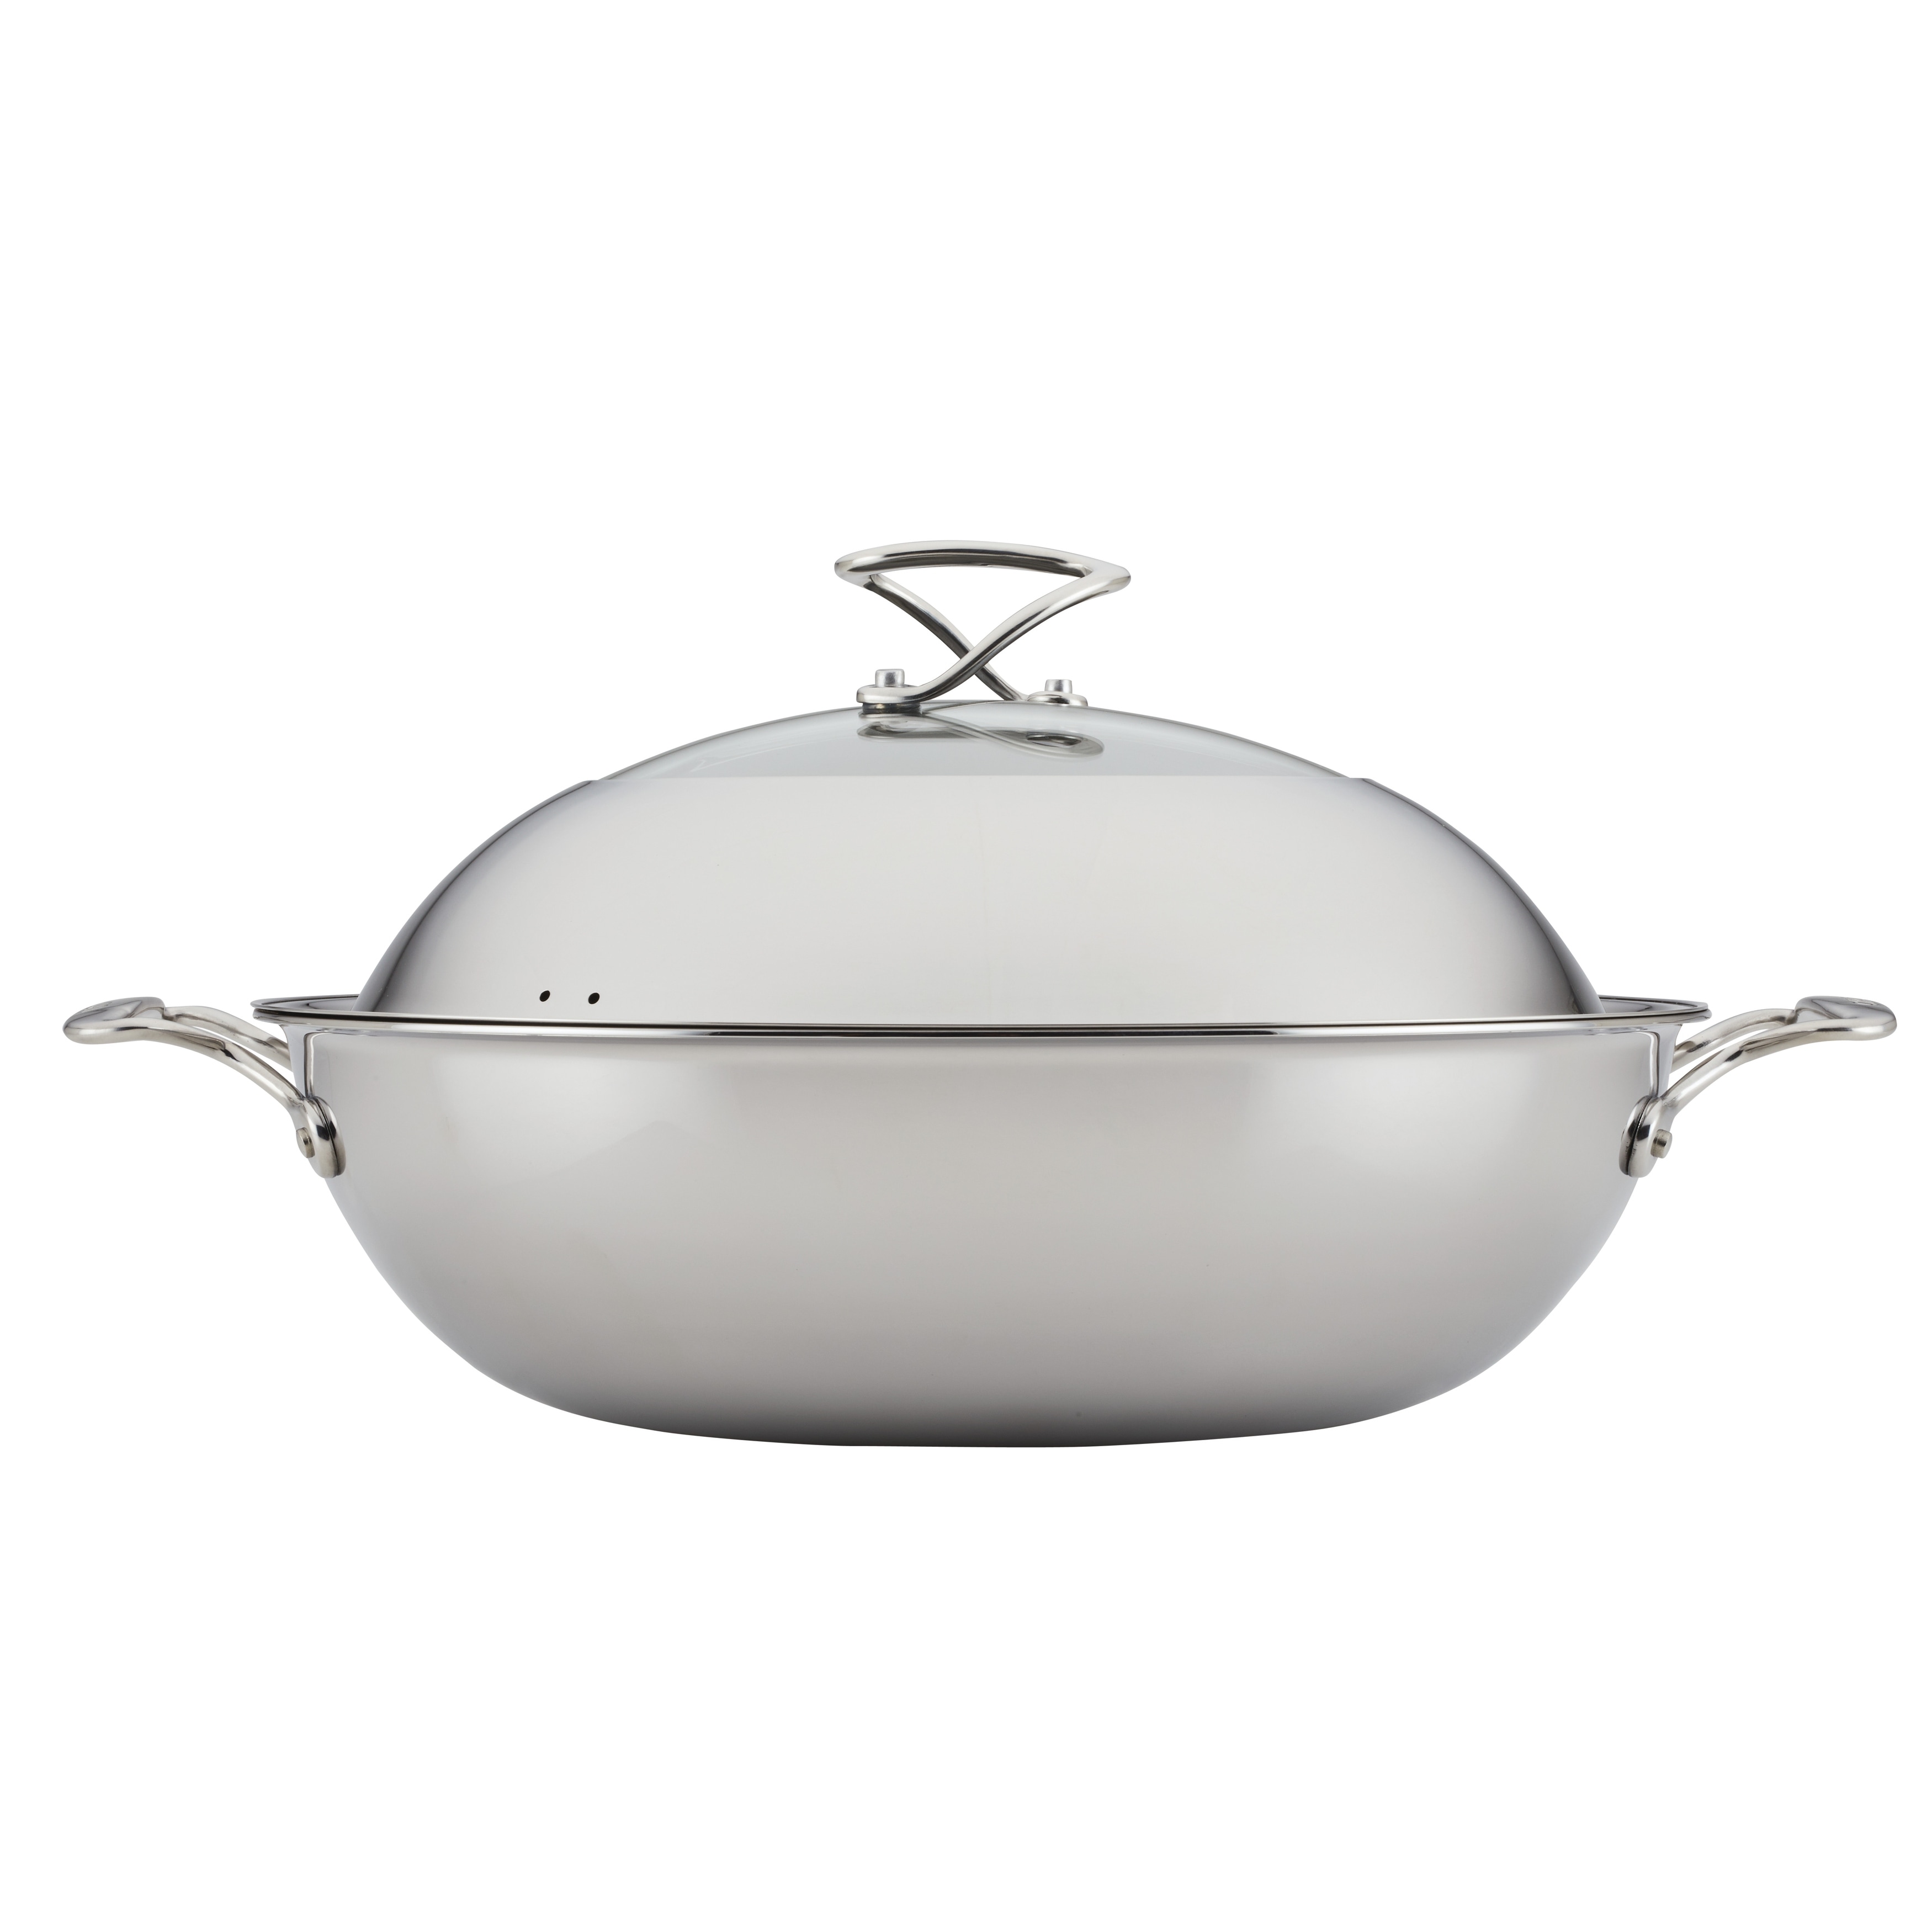 https://ak1.ostkcdn.com/images/products/is/images/direct/9026cc02640a68323e48d6784b84d155644303f9/Circulon-Clad-Stainless-Steel-Induction-Wok-with-Glass-Lid-and-Hybrid-SteelShield-and-Nonstick-Technology%2C-14-Inch%2C-Silver.jpg